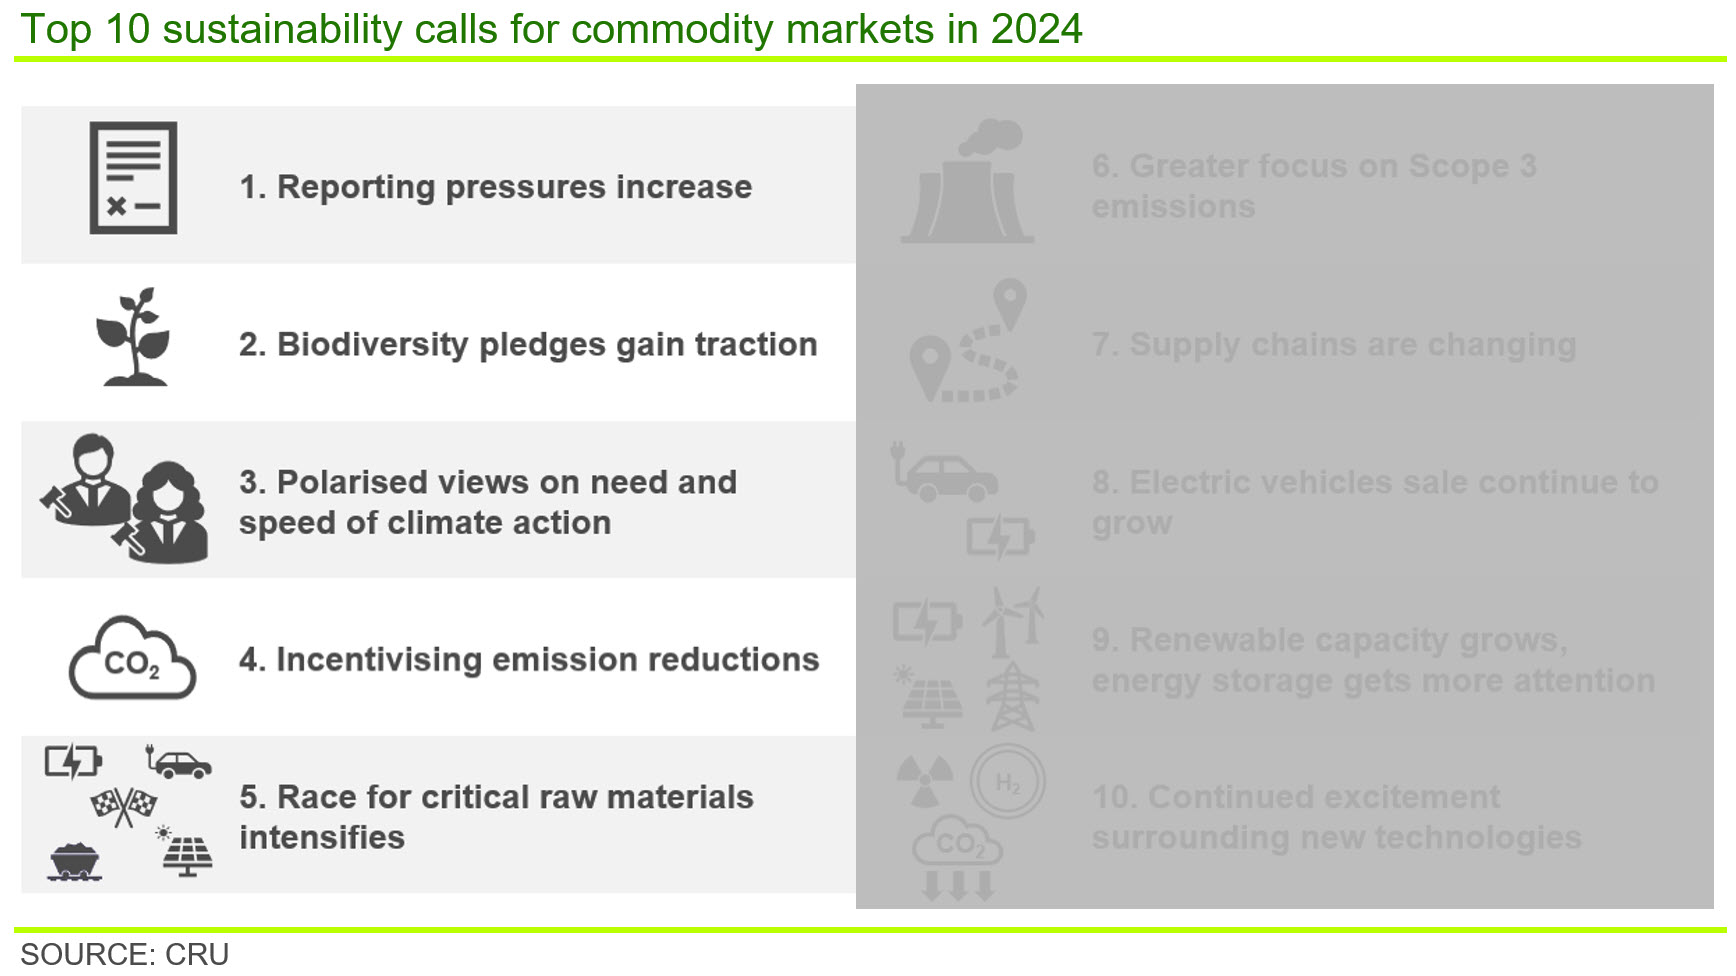 List of top 10 sustainability calls for commodity markets in 2024